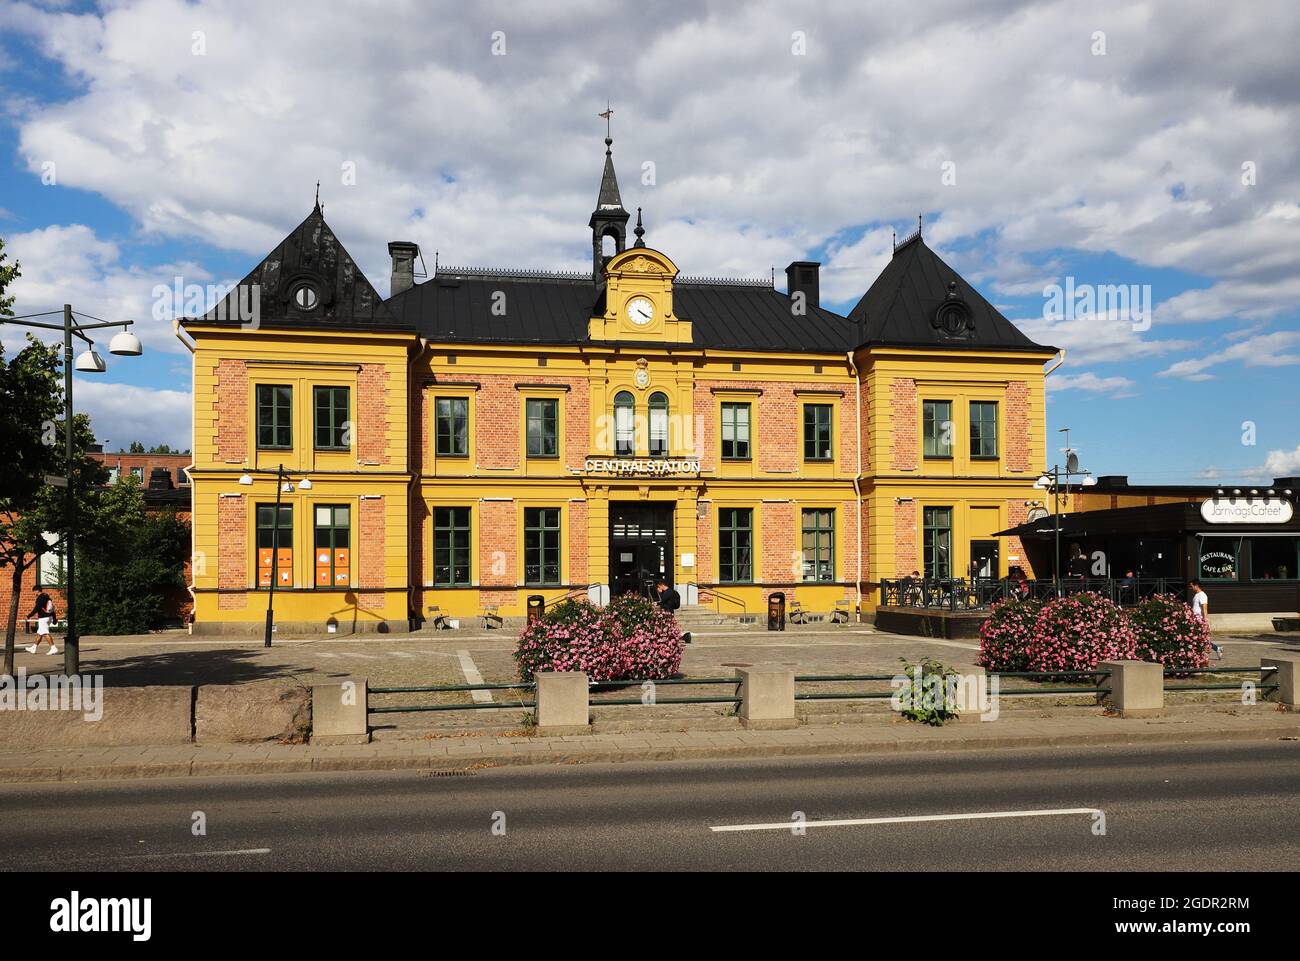 Linkoping, Sweden - August 5, 2021: Exterior view of the Linkoping railroad station building. Stock Photo